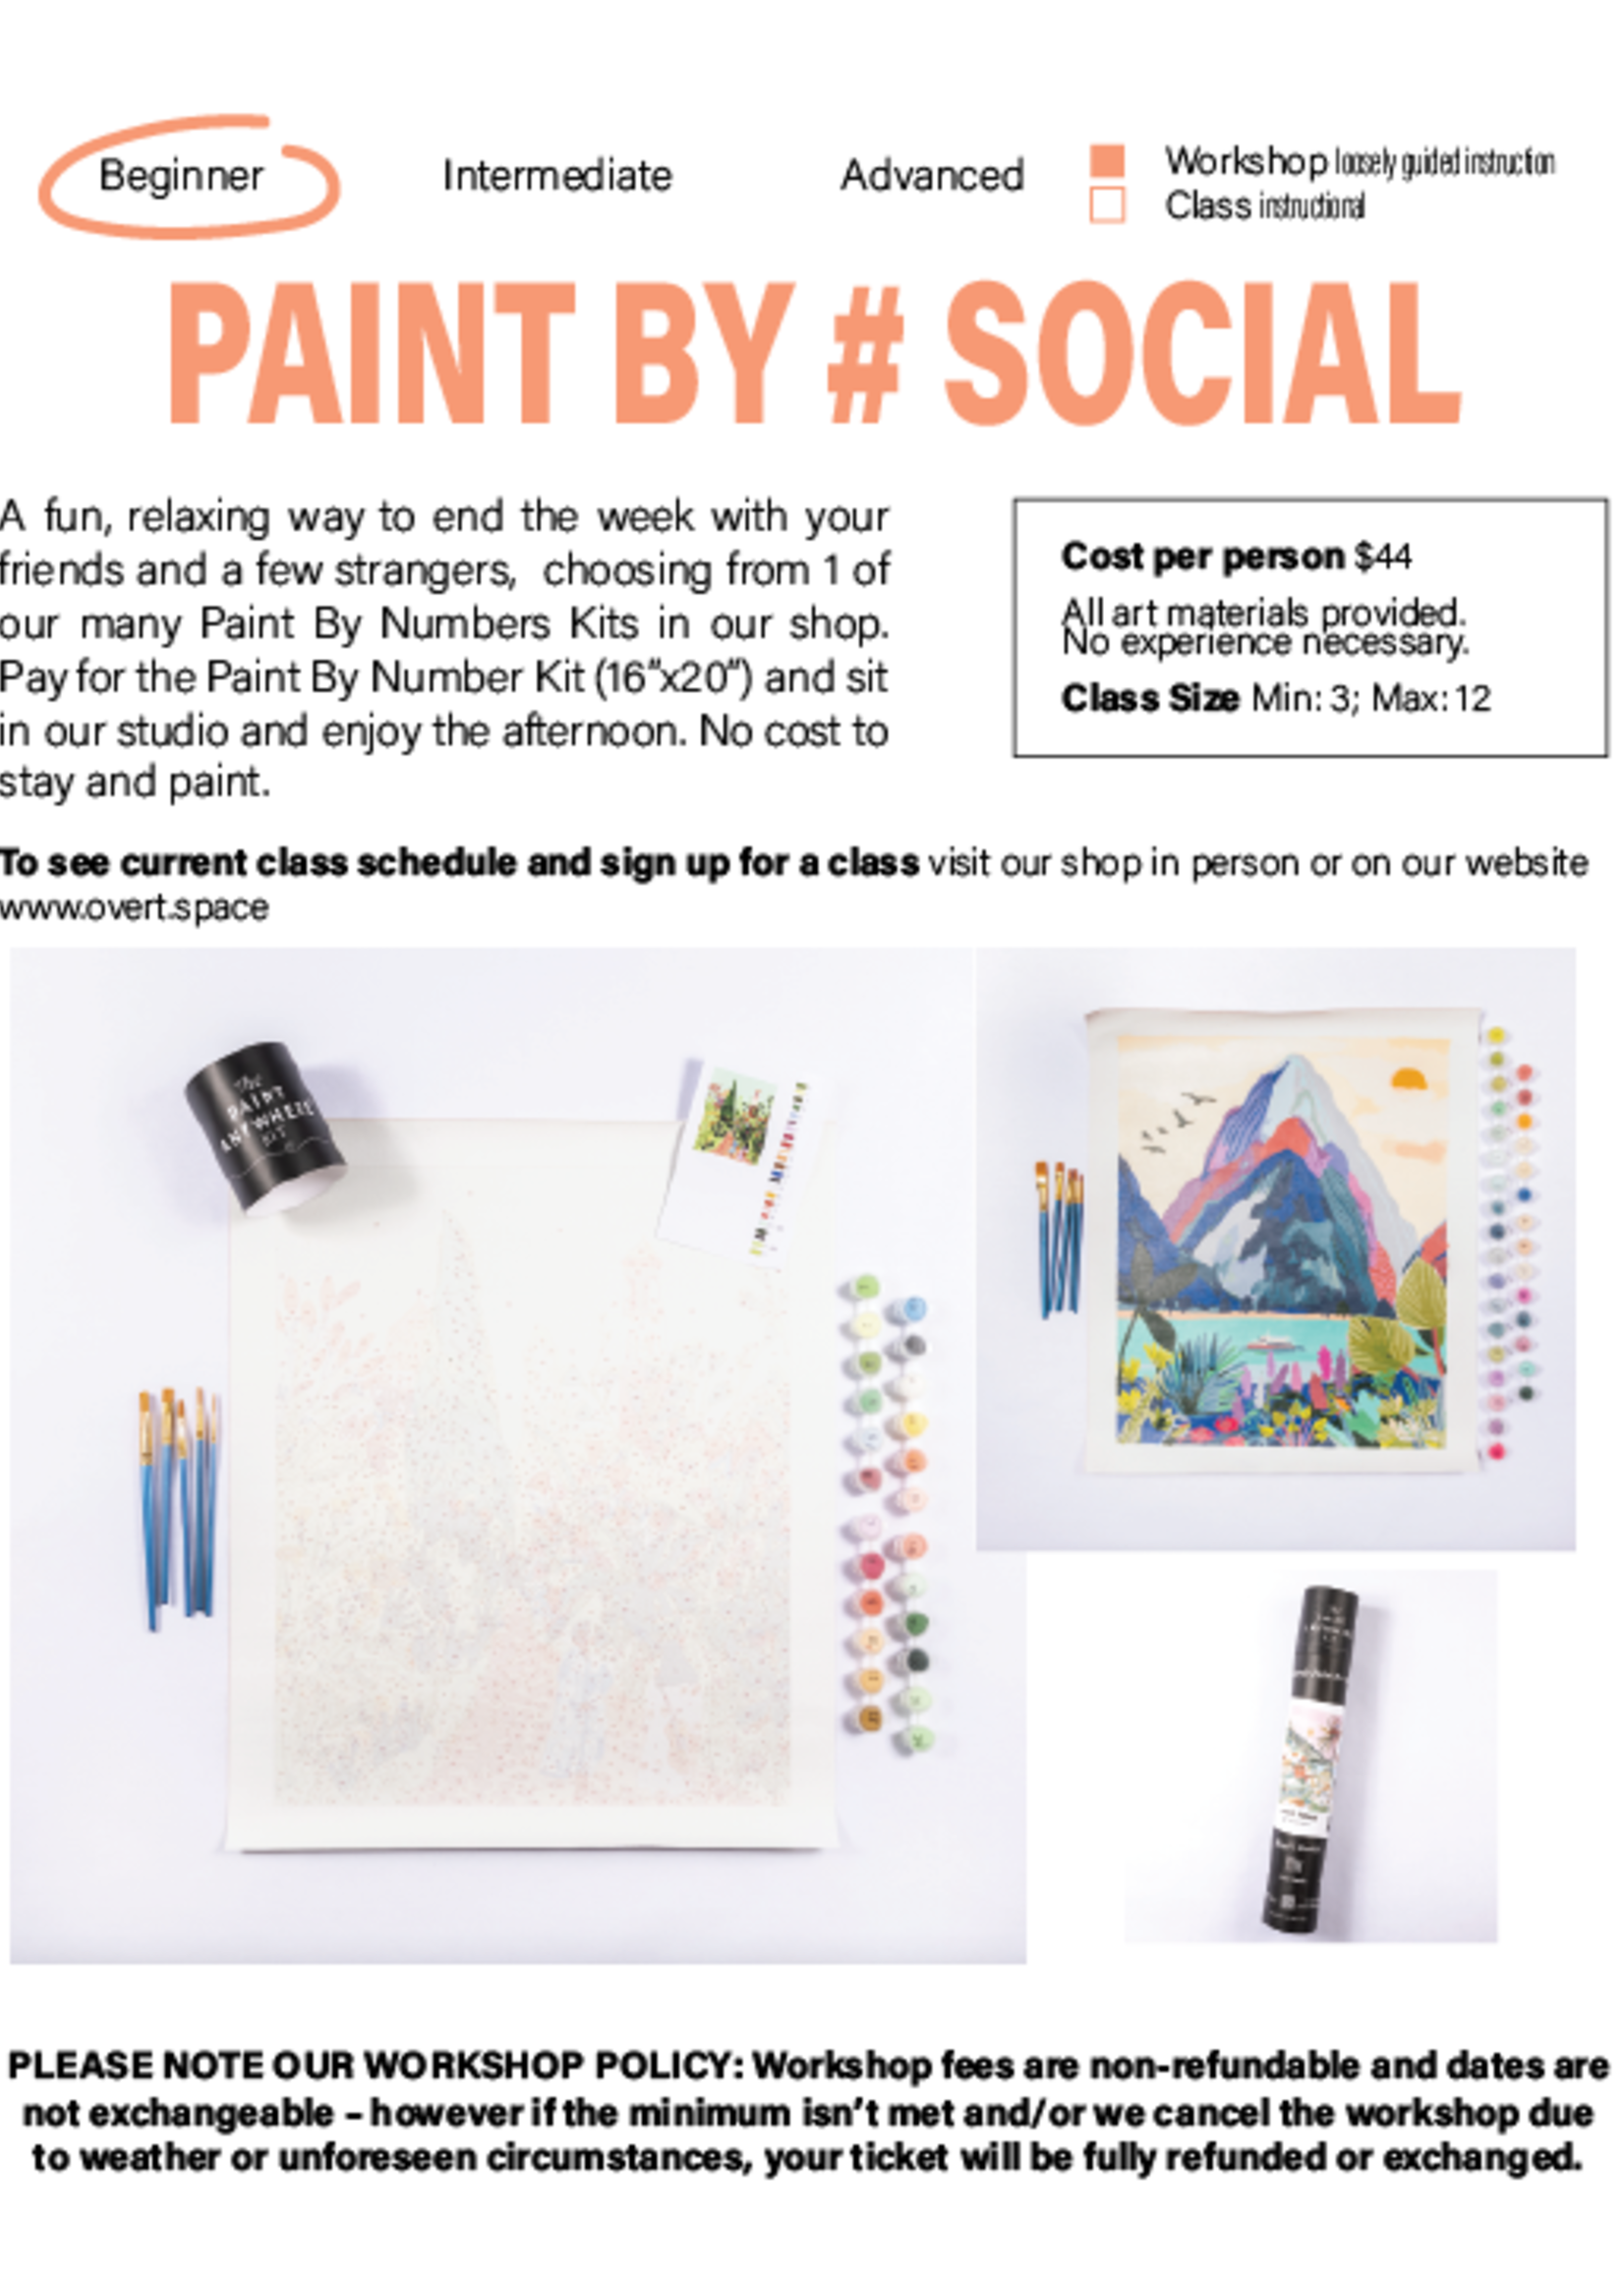 JULY 10 Paint by Number Social